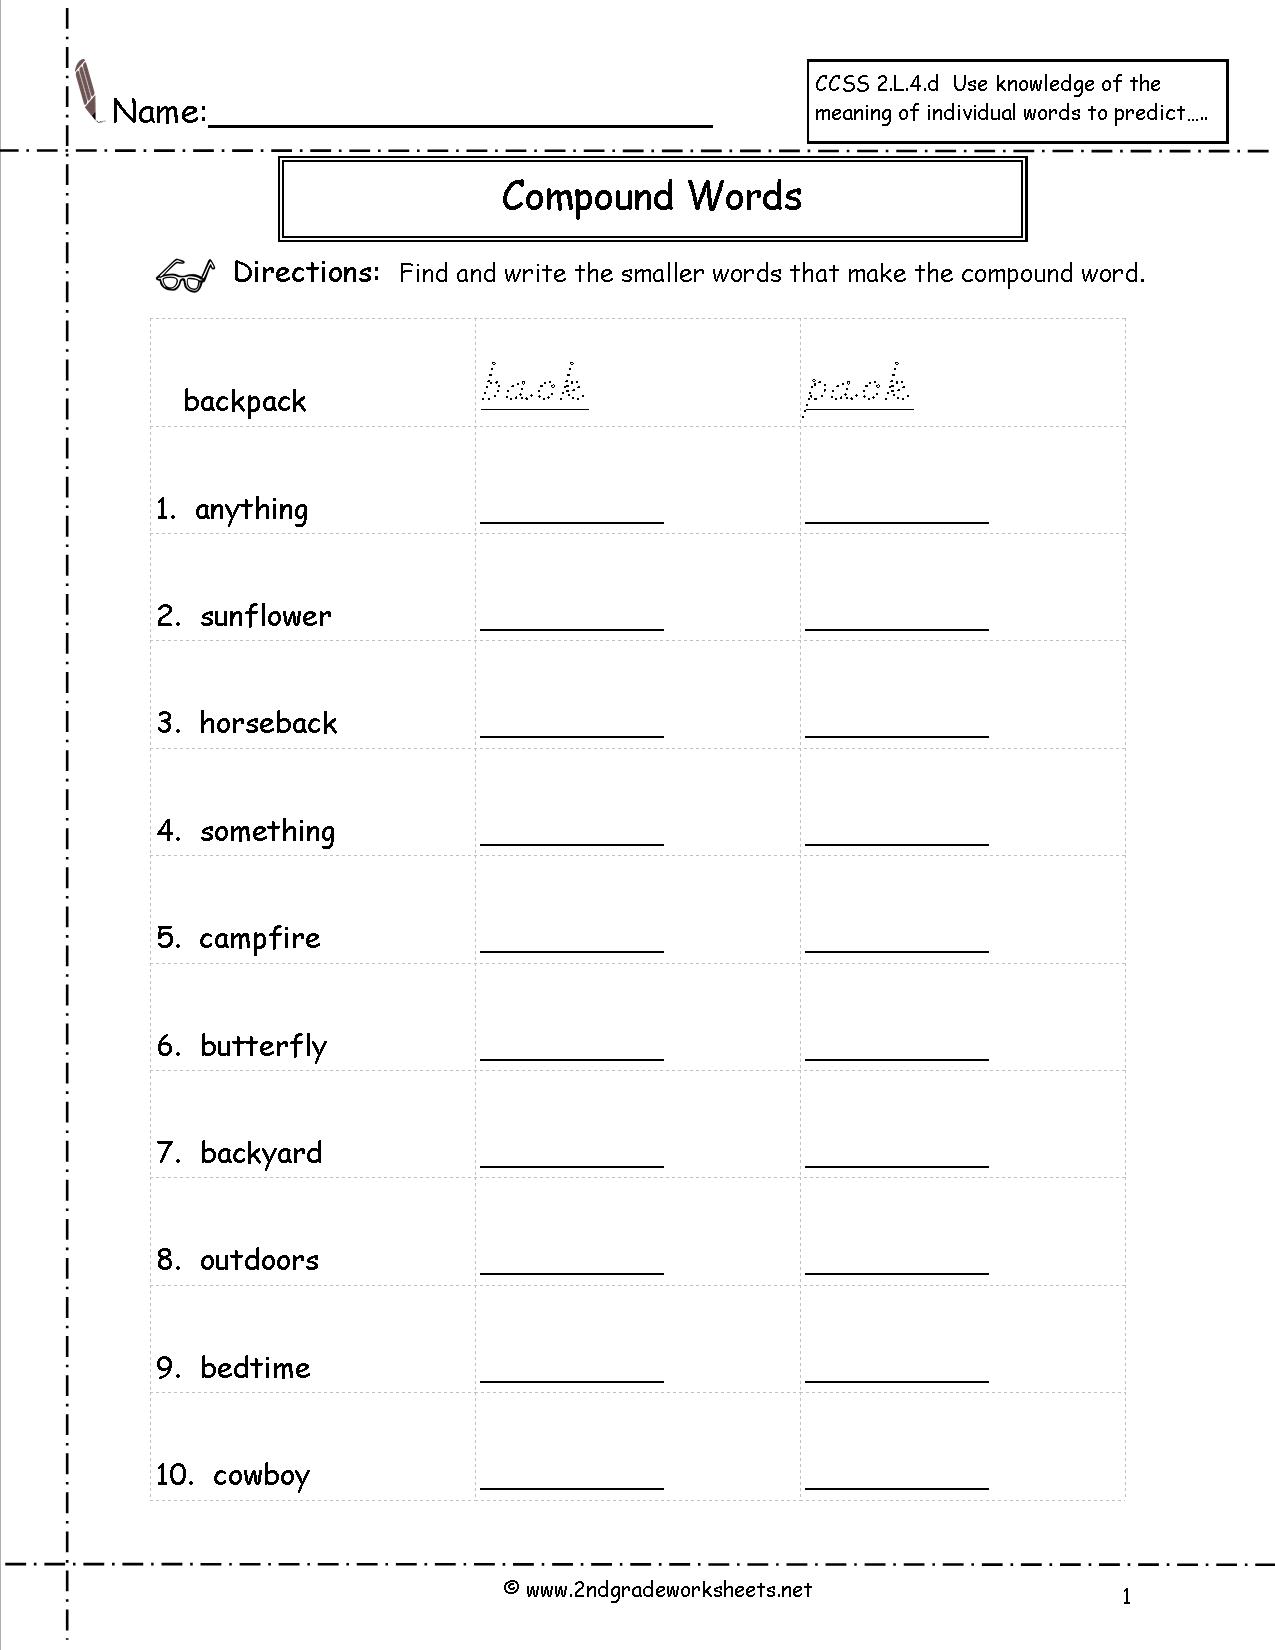 15-best-images-of-contractions-practice-worksheet-2nd-grade-compound-words-worksheets-context